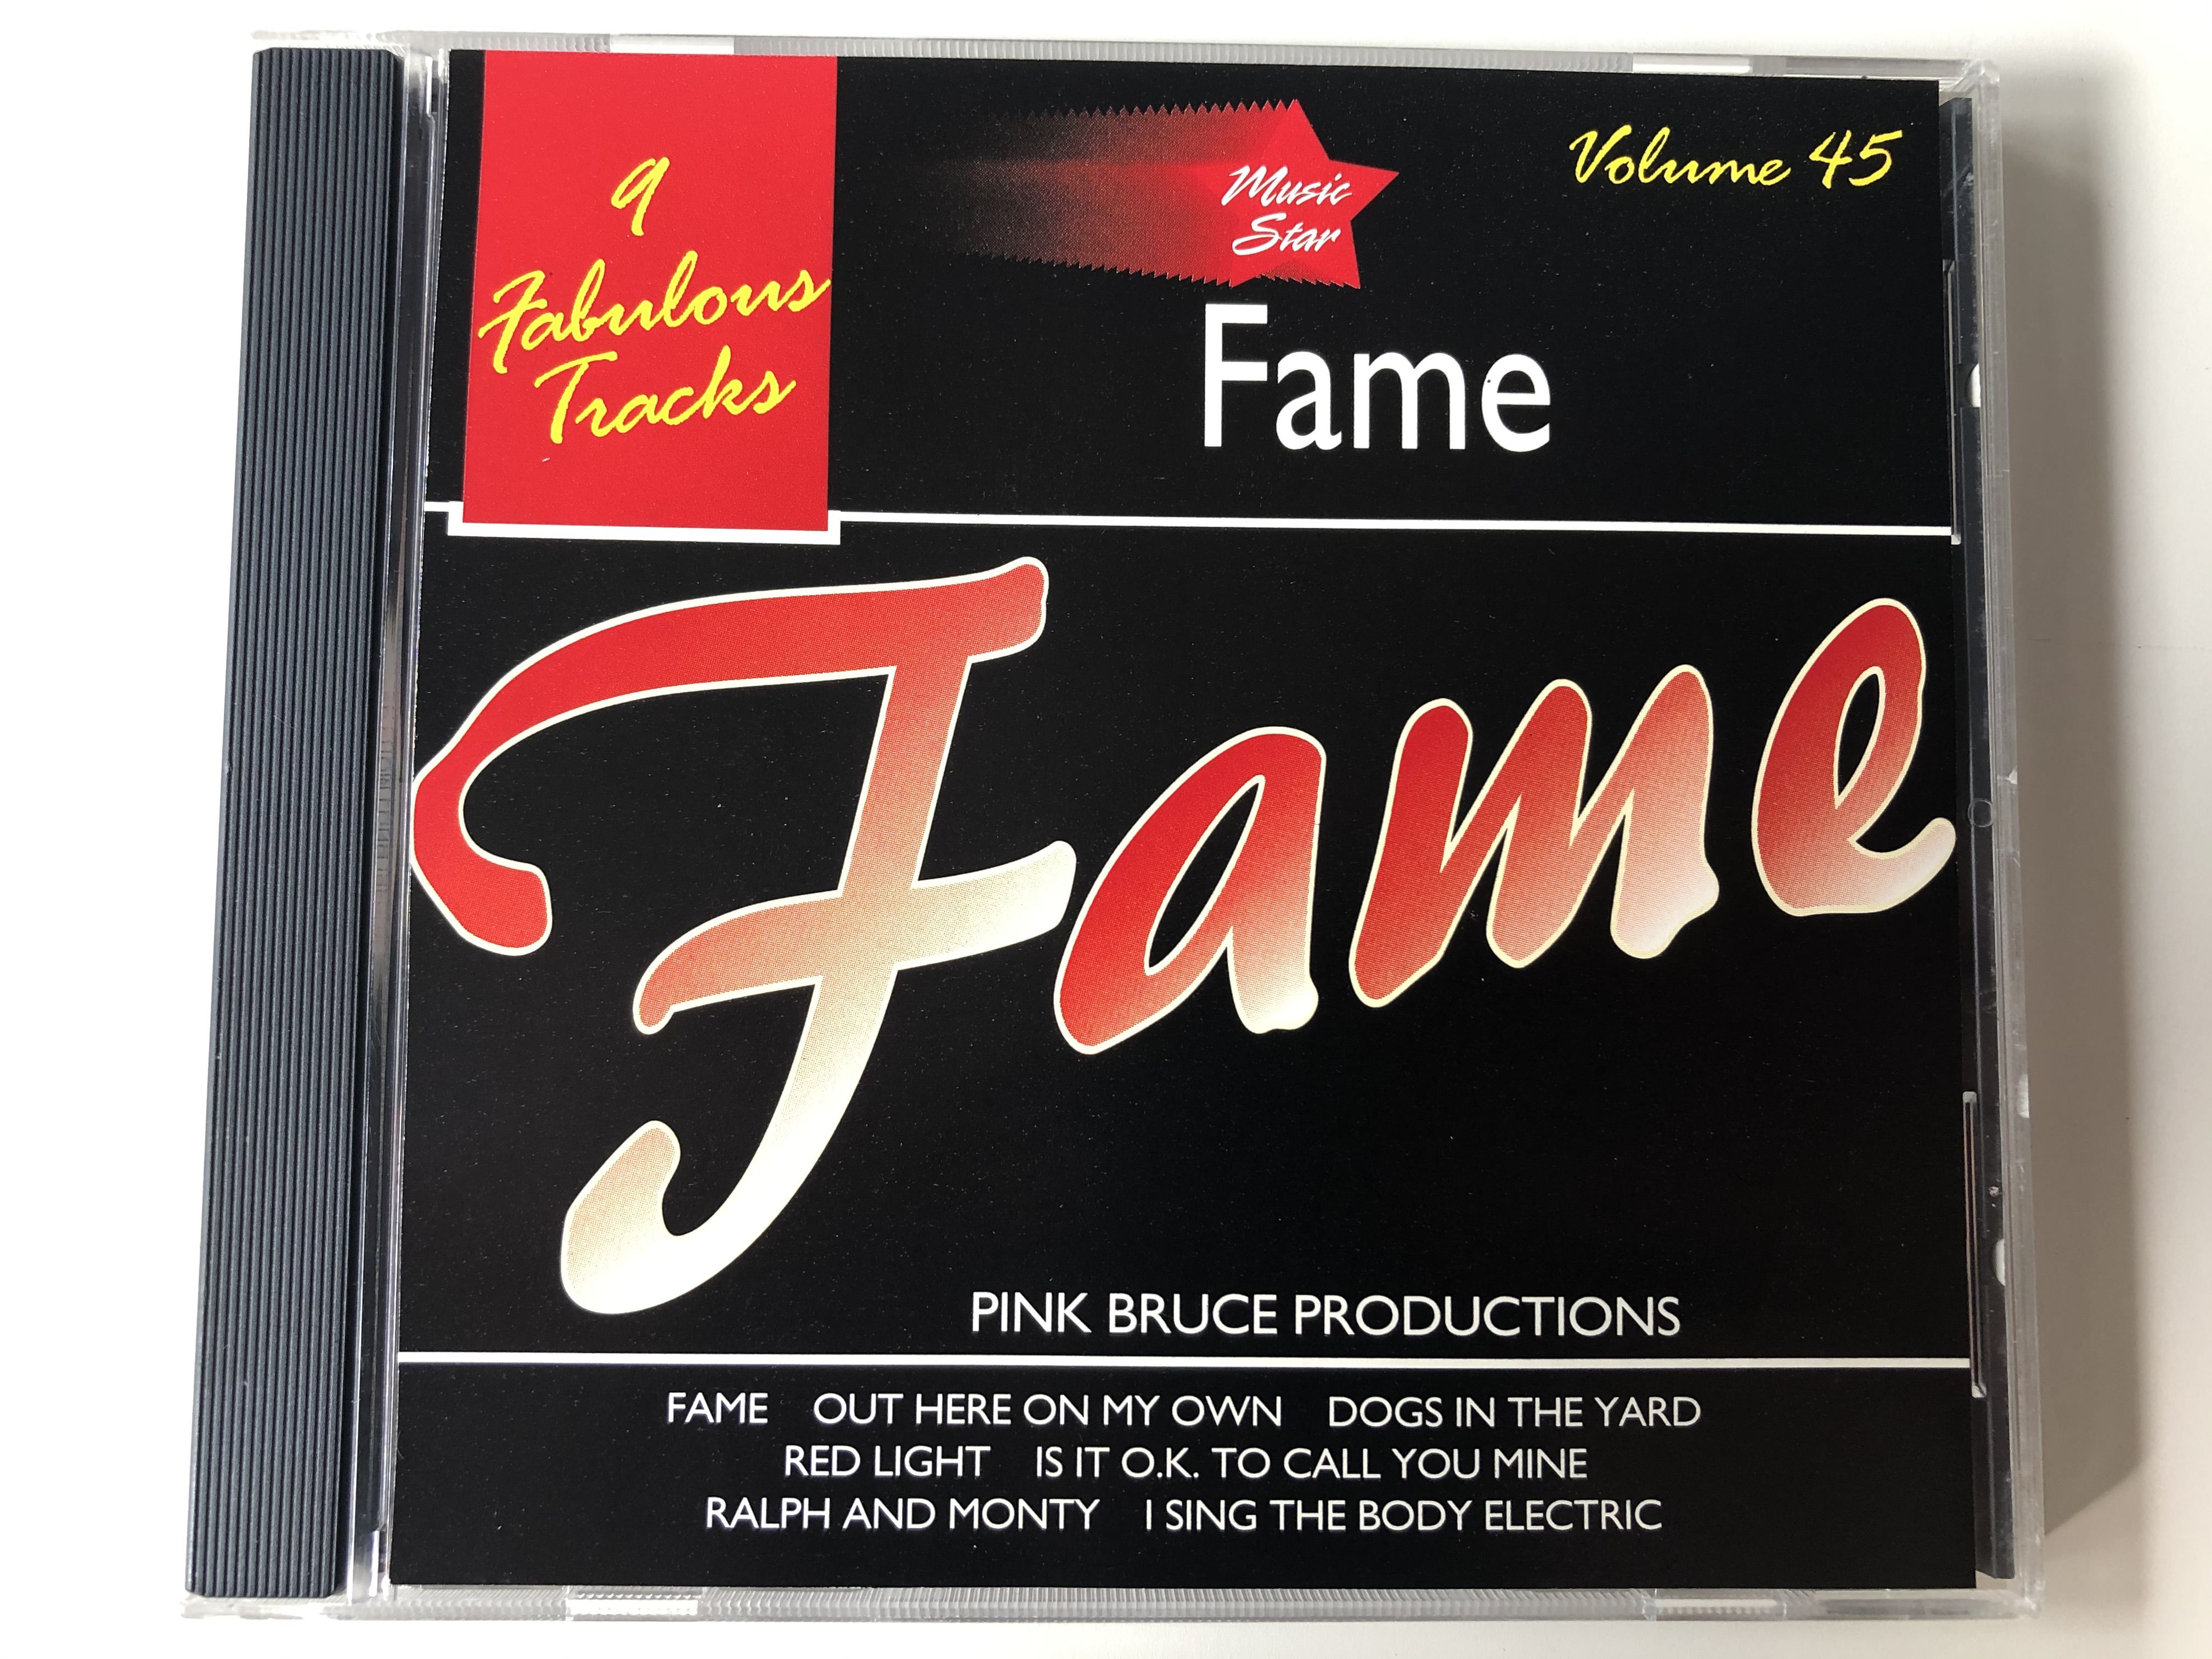 fame-pink-bruce-productions-volume-45-9-fabulous-tracks-fame-out-her-on-my-own-dogs-in-the-yard-red-light-is-it-o.k.-to-call-you-mine-ralph-and-monty-i-sing-the-body-electric-music-sta-1-.jpg